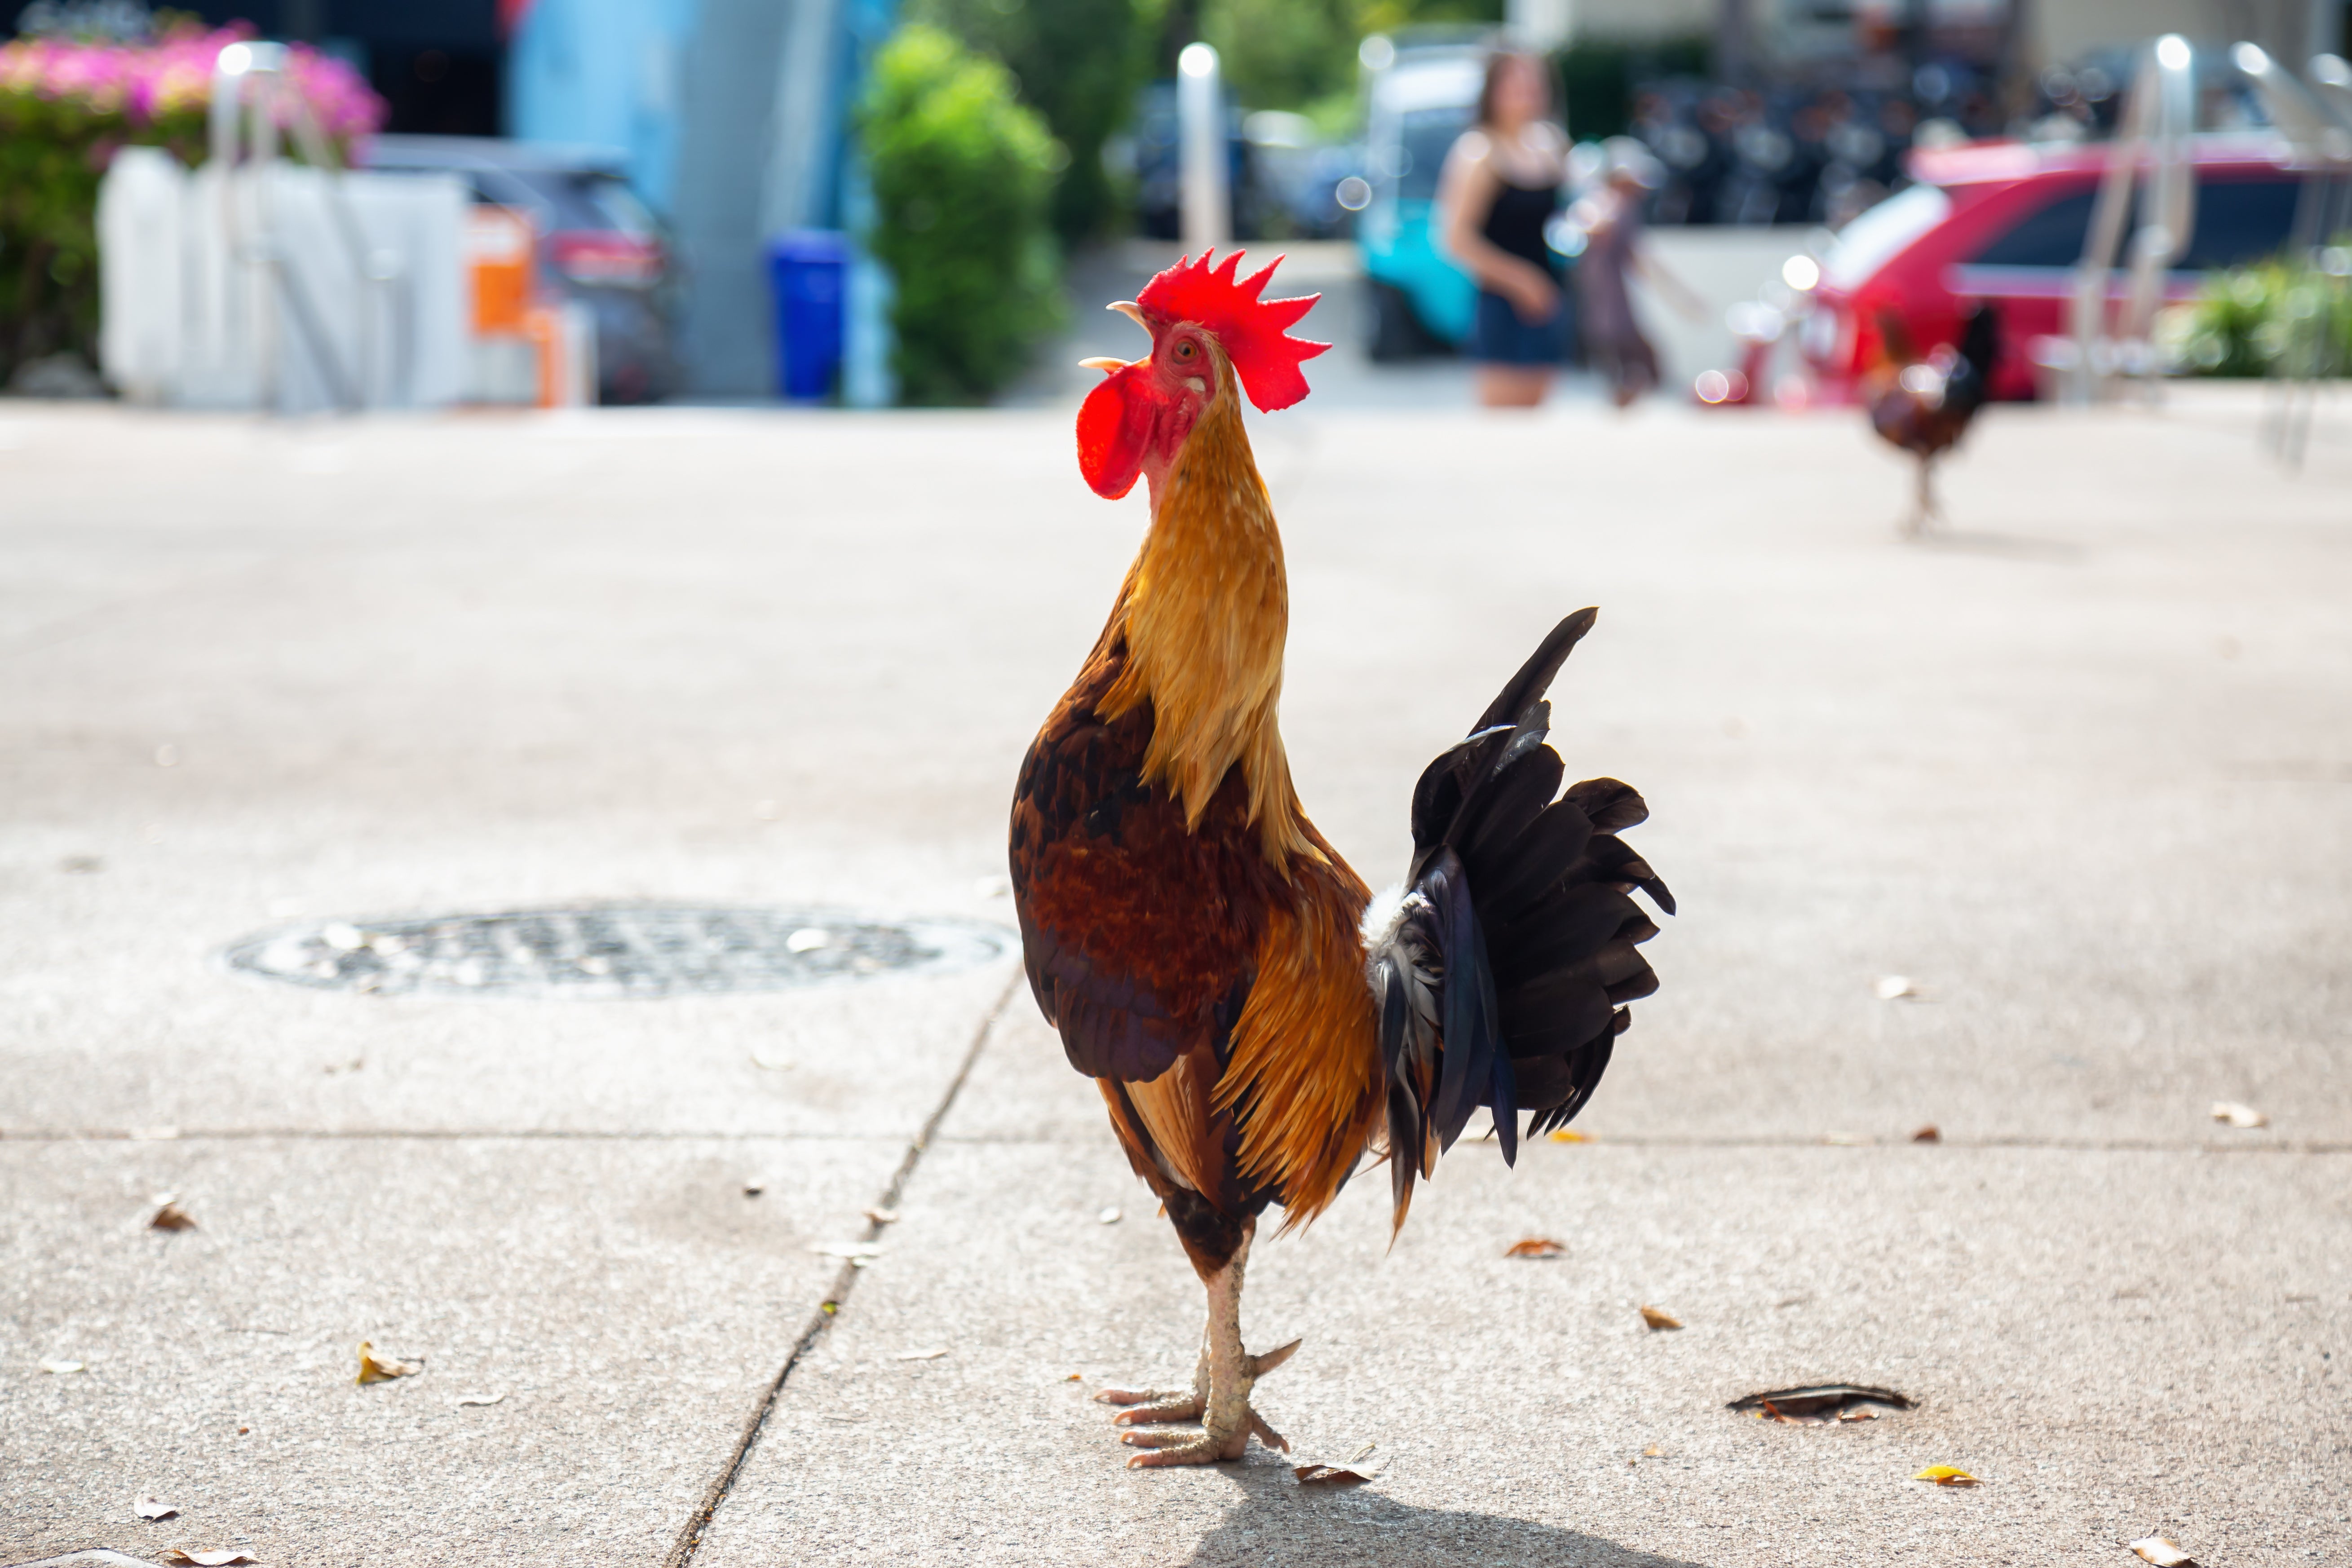 What's up with the chickens in Key West?